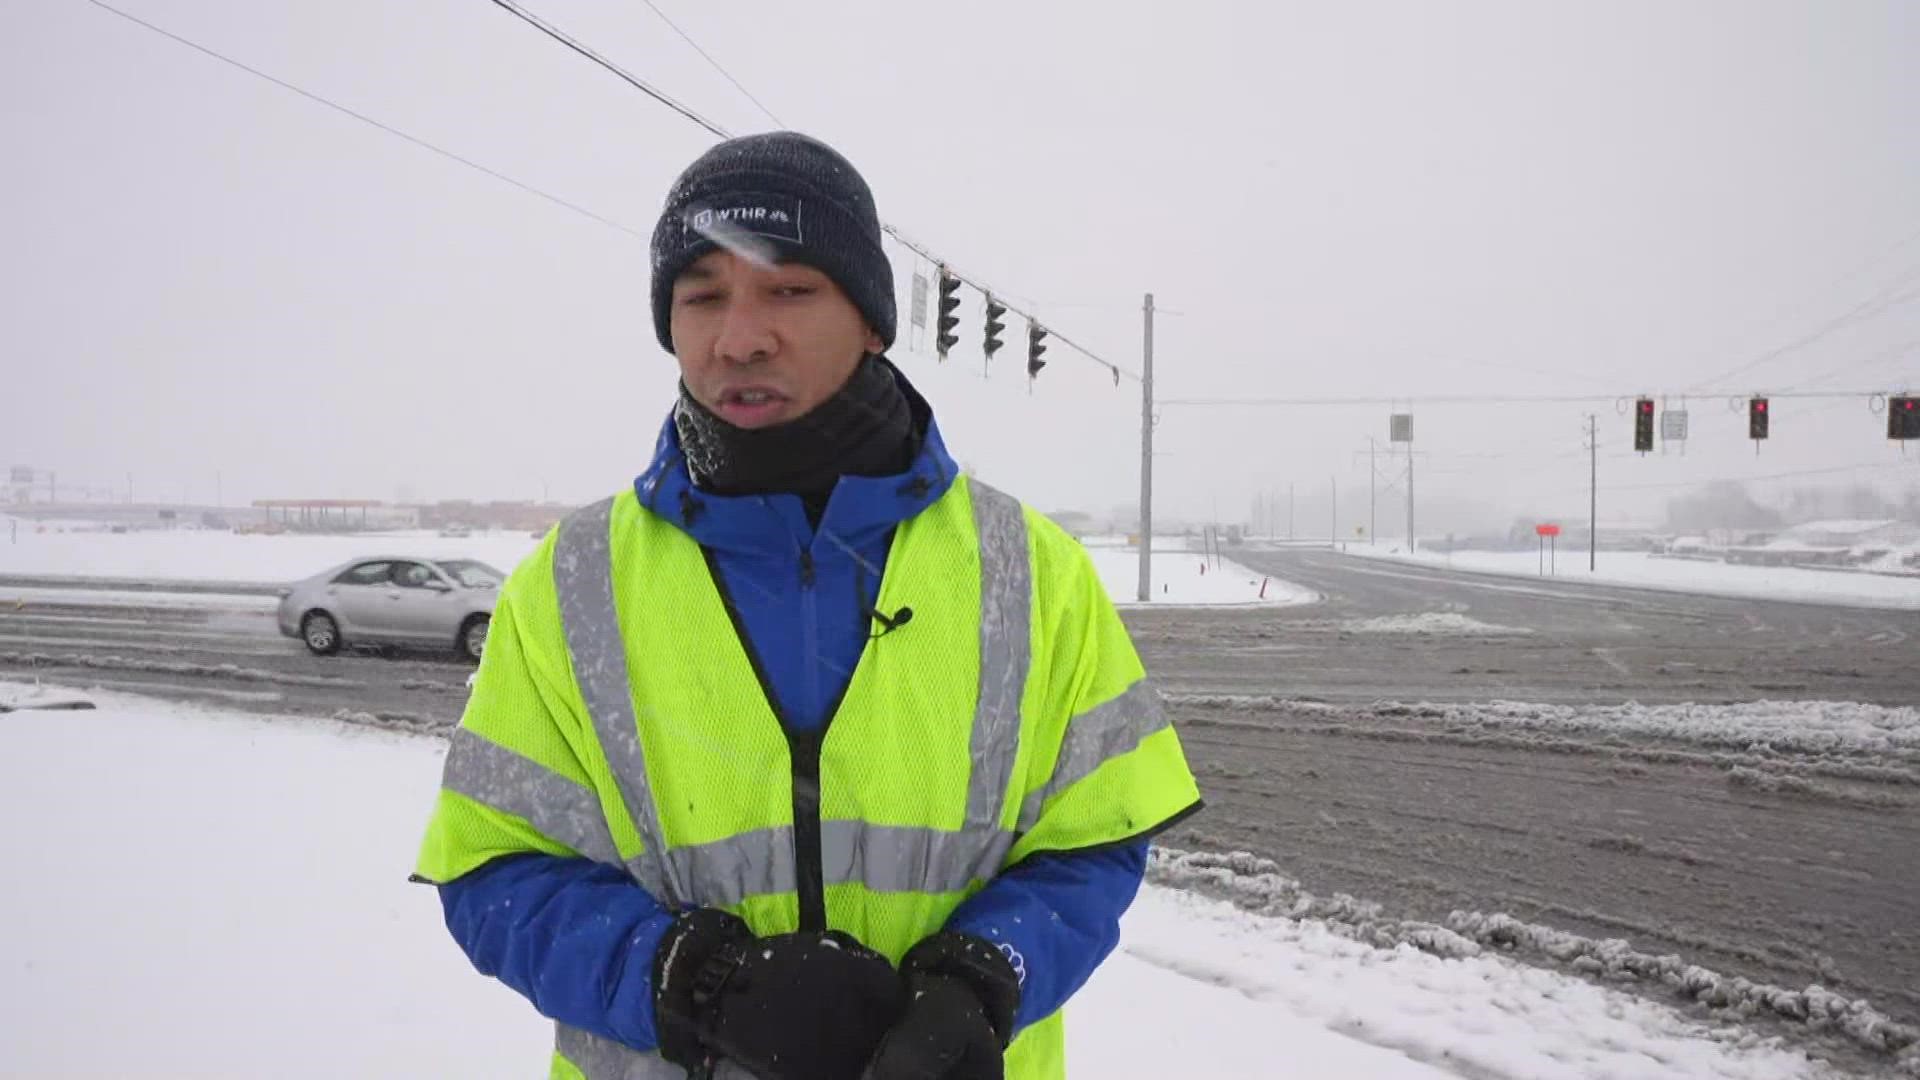 Our 13 News crews give an update on the winter storm at noon.